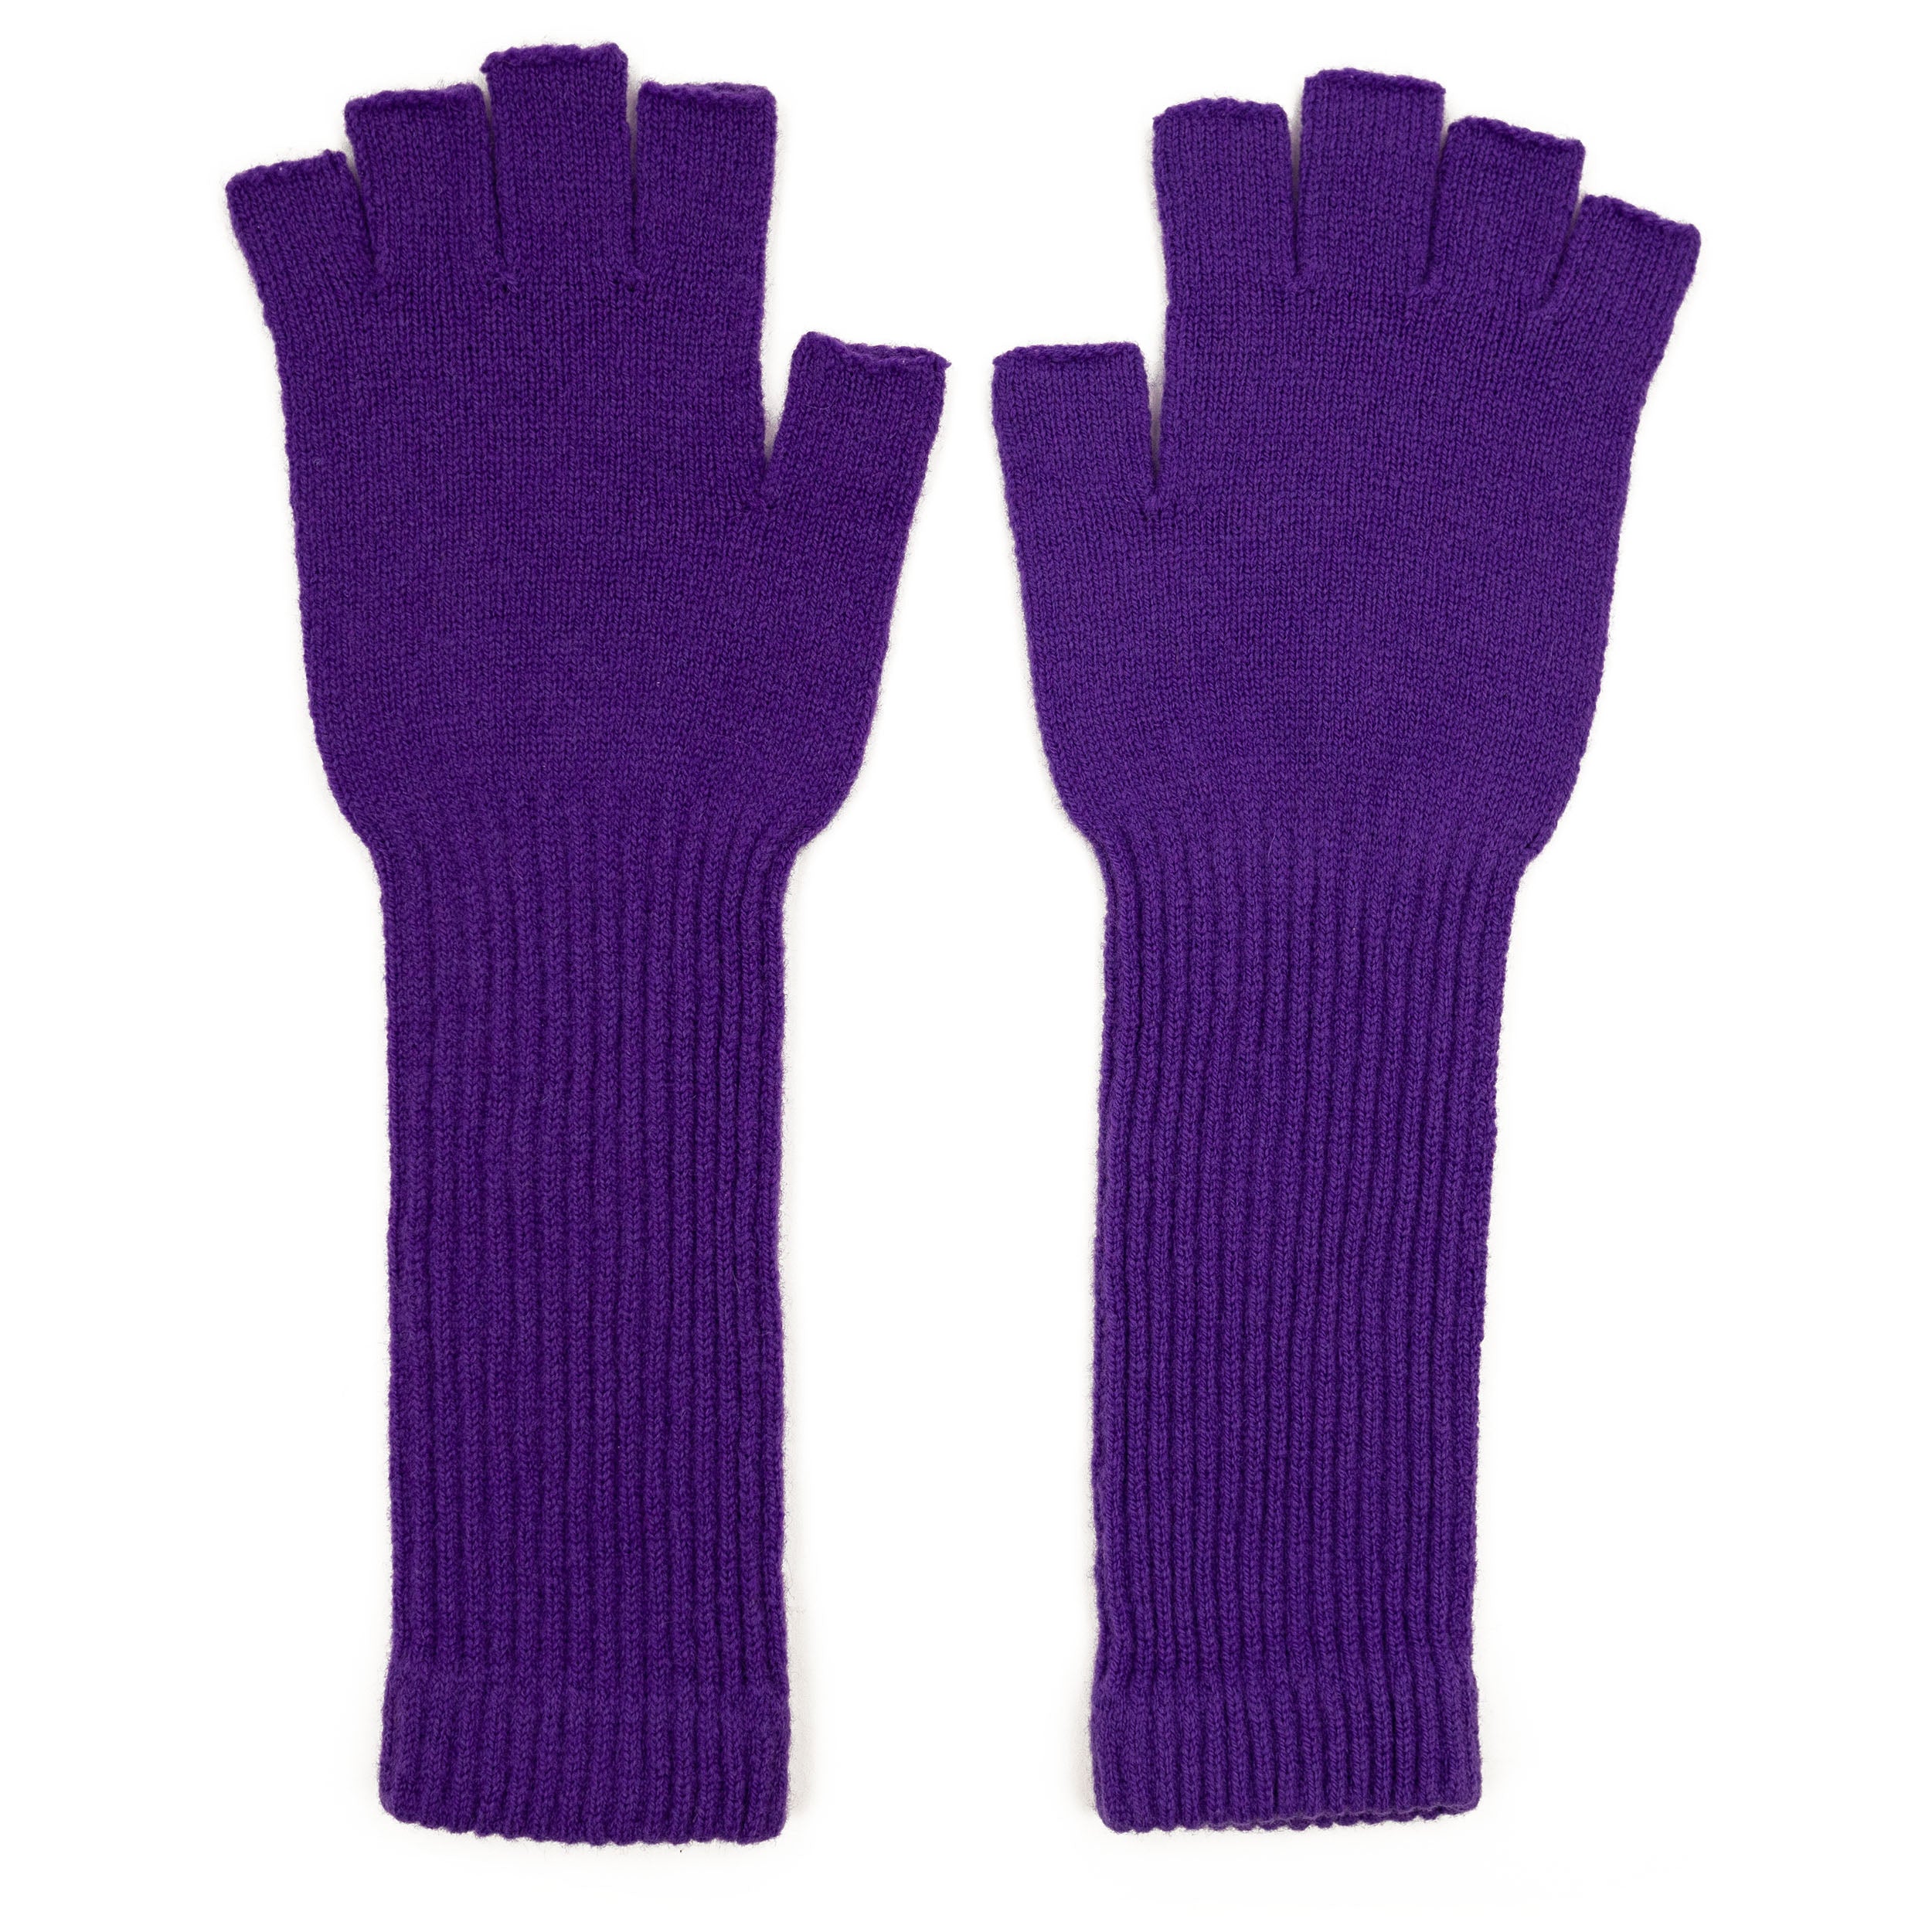 Carrier Company Gathering Glove in Grape